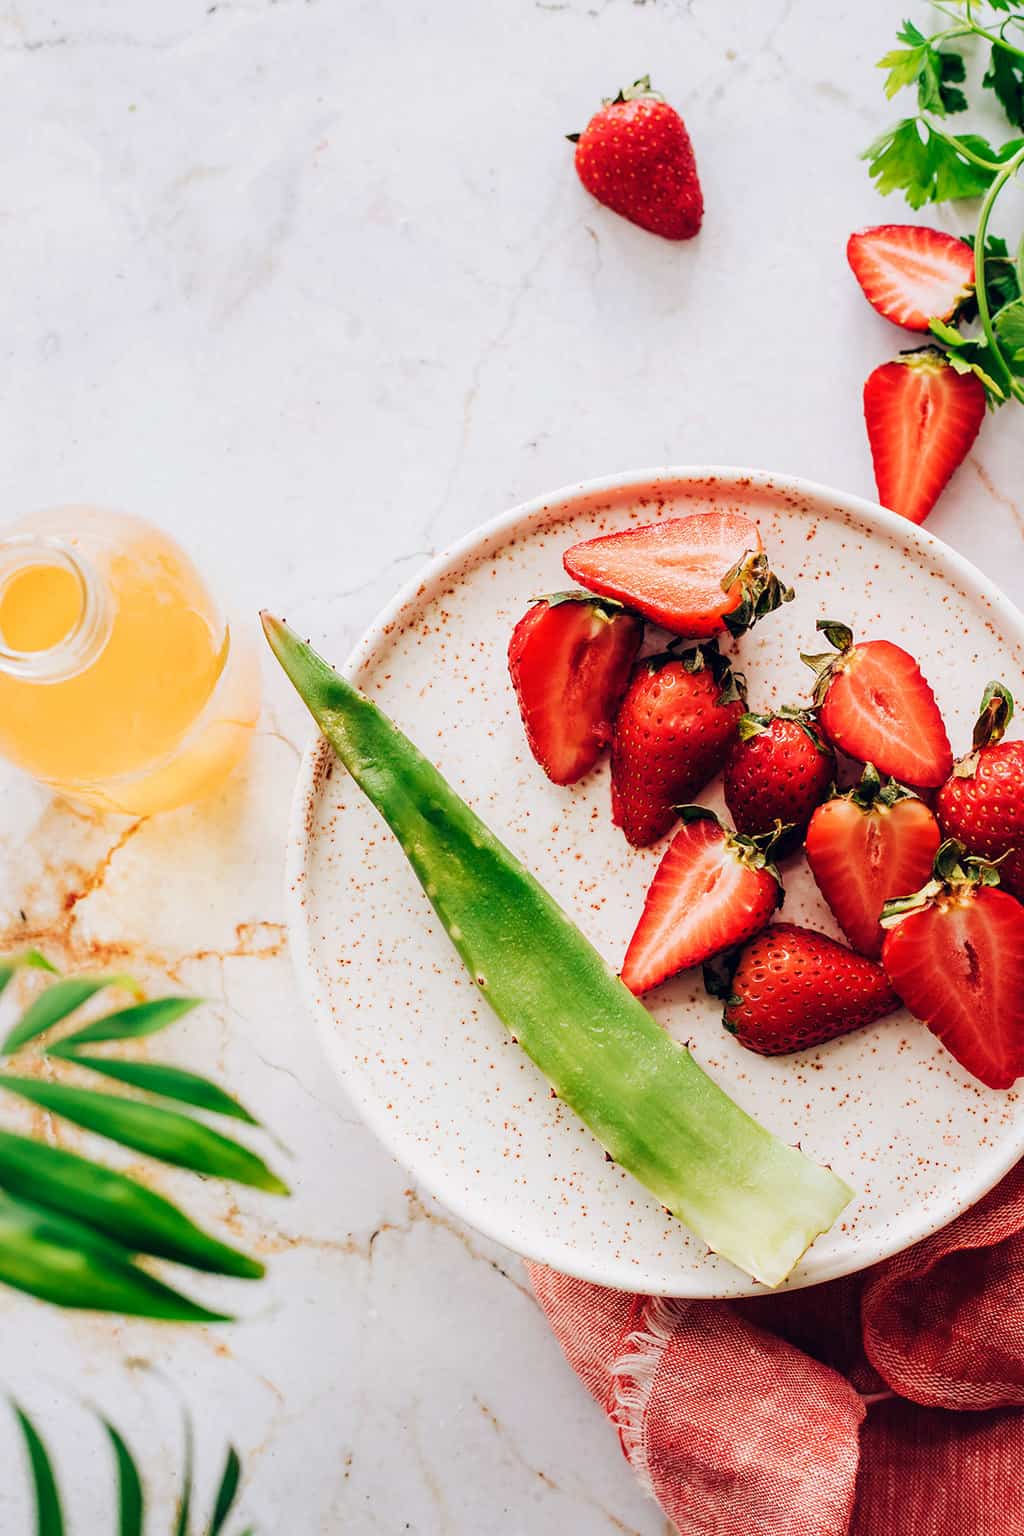 Ingredients for Aloe Smoothie with Strawberry